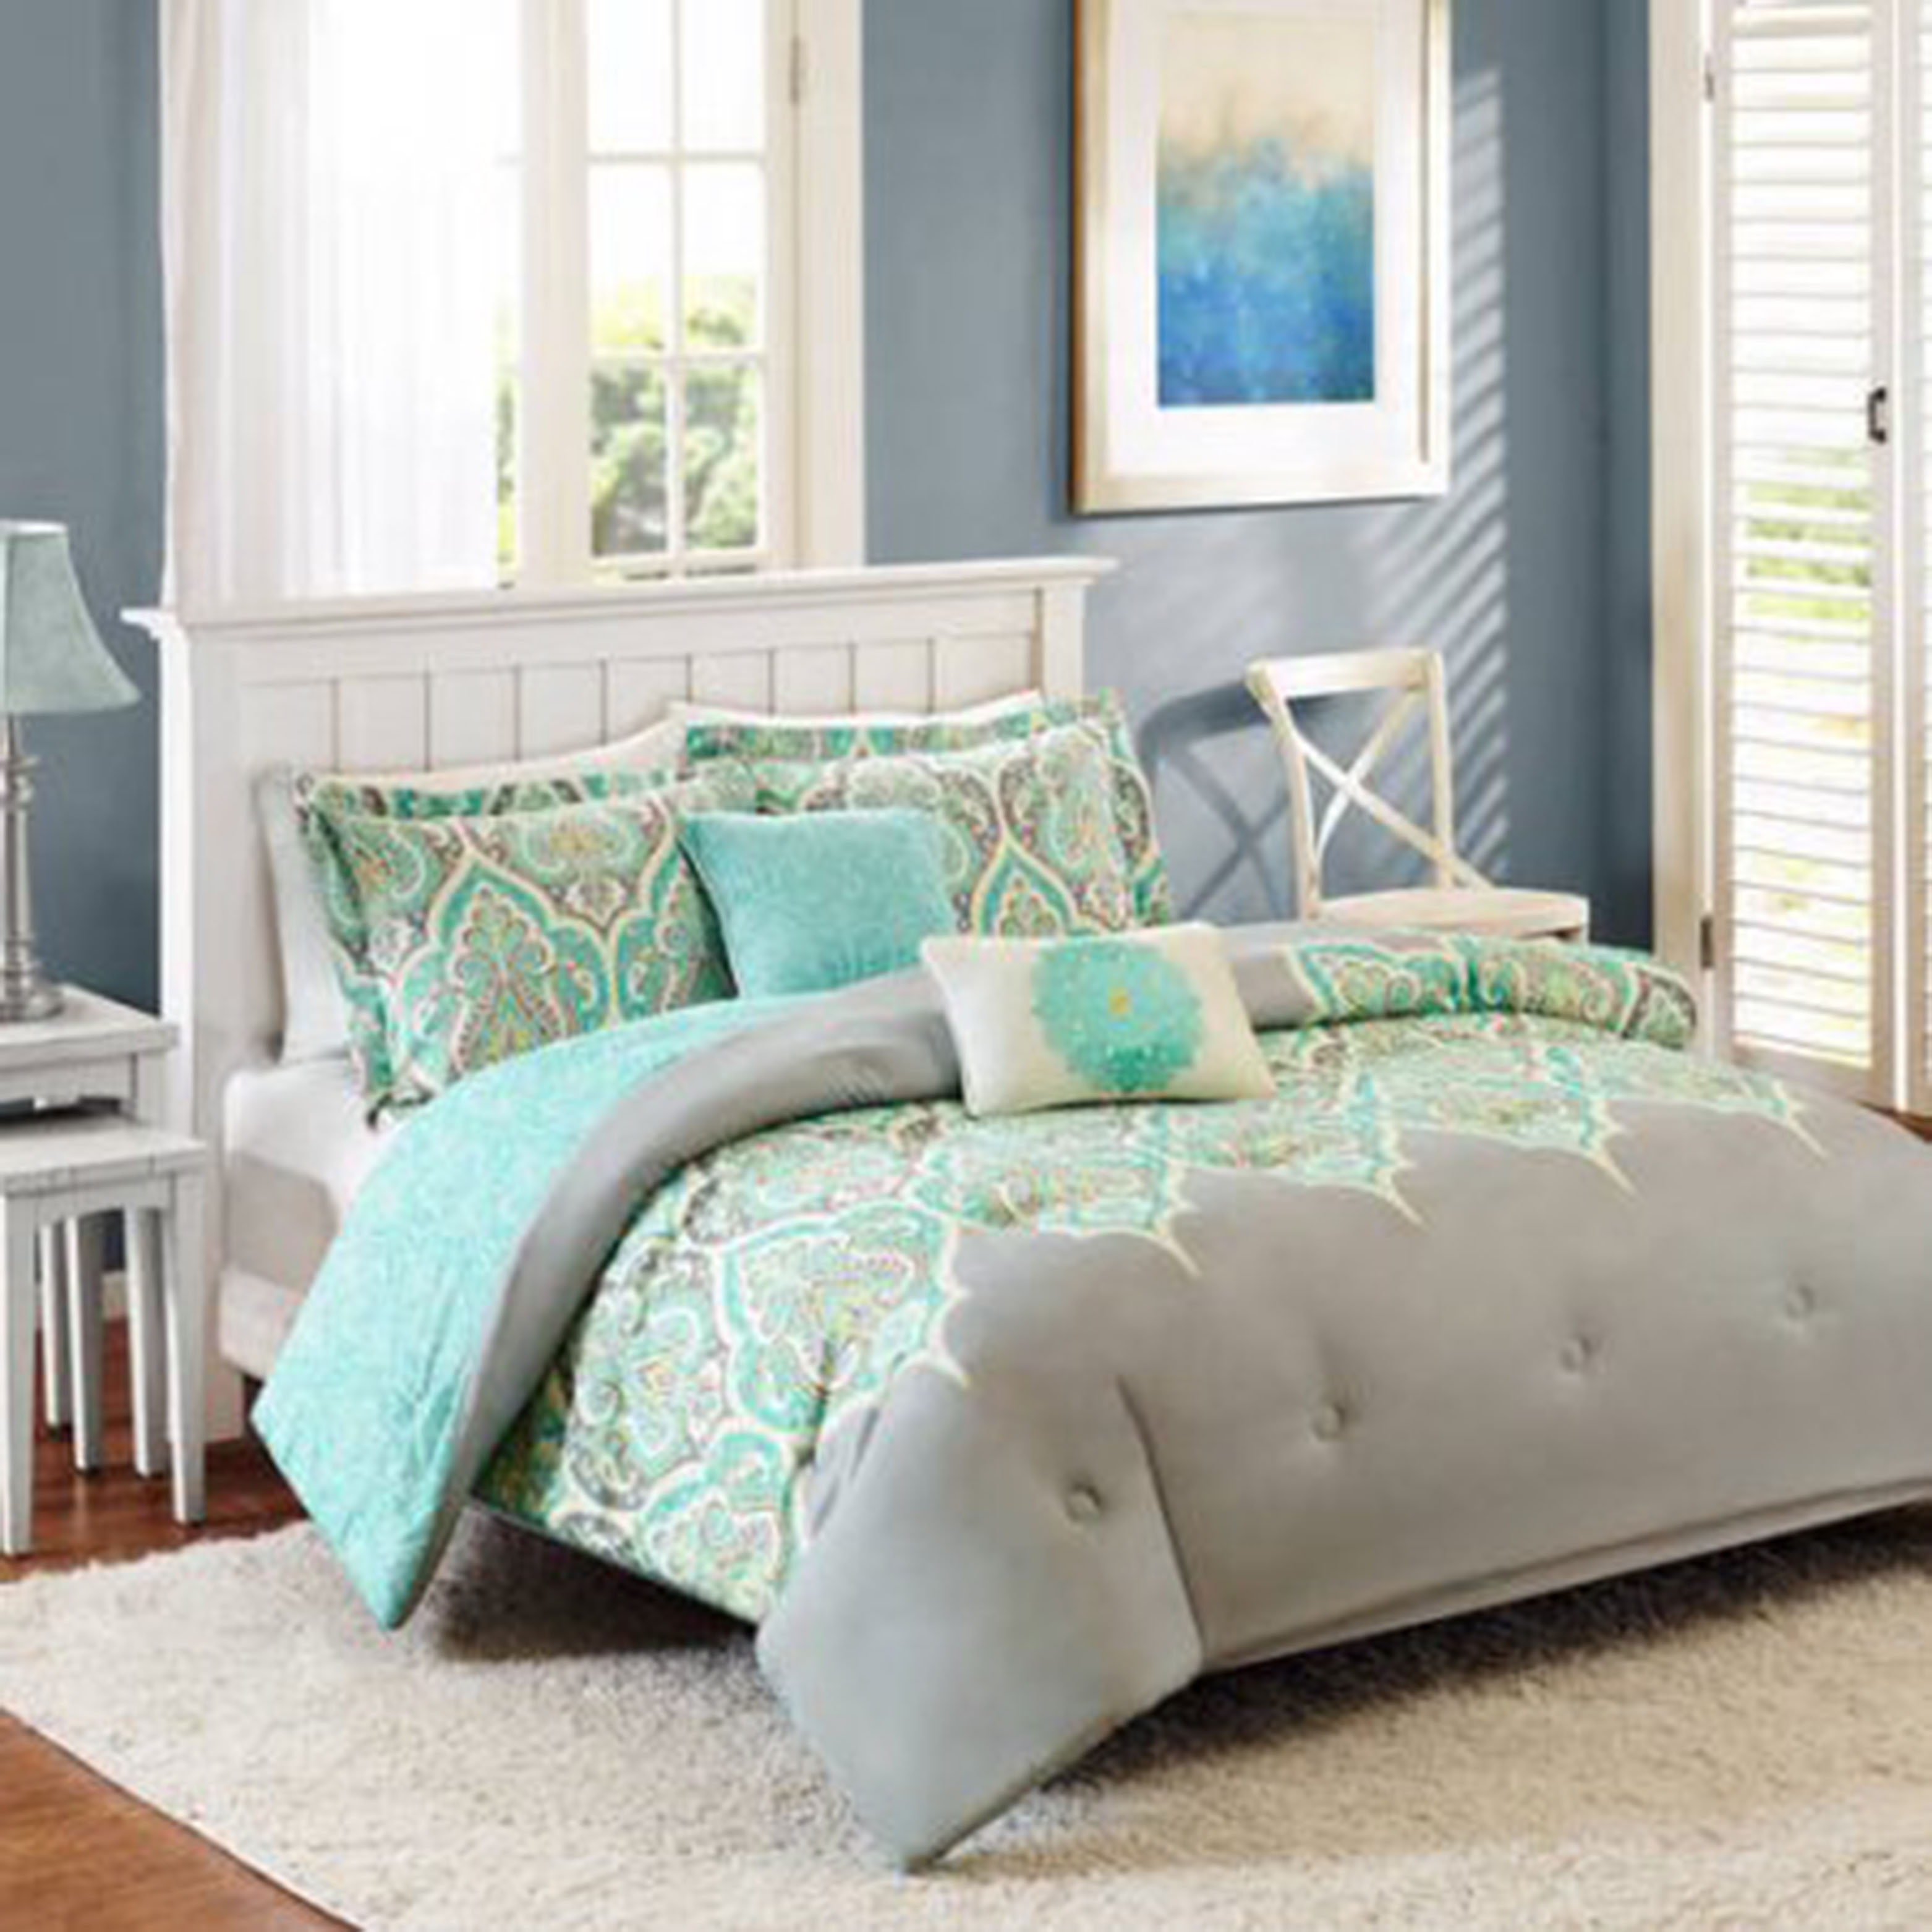 Better Homes and Gardens king 5-piece medallions comforter set for $27